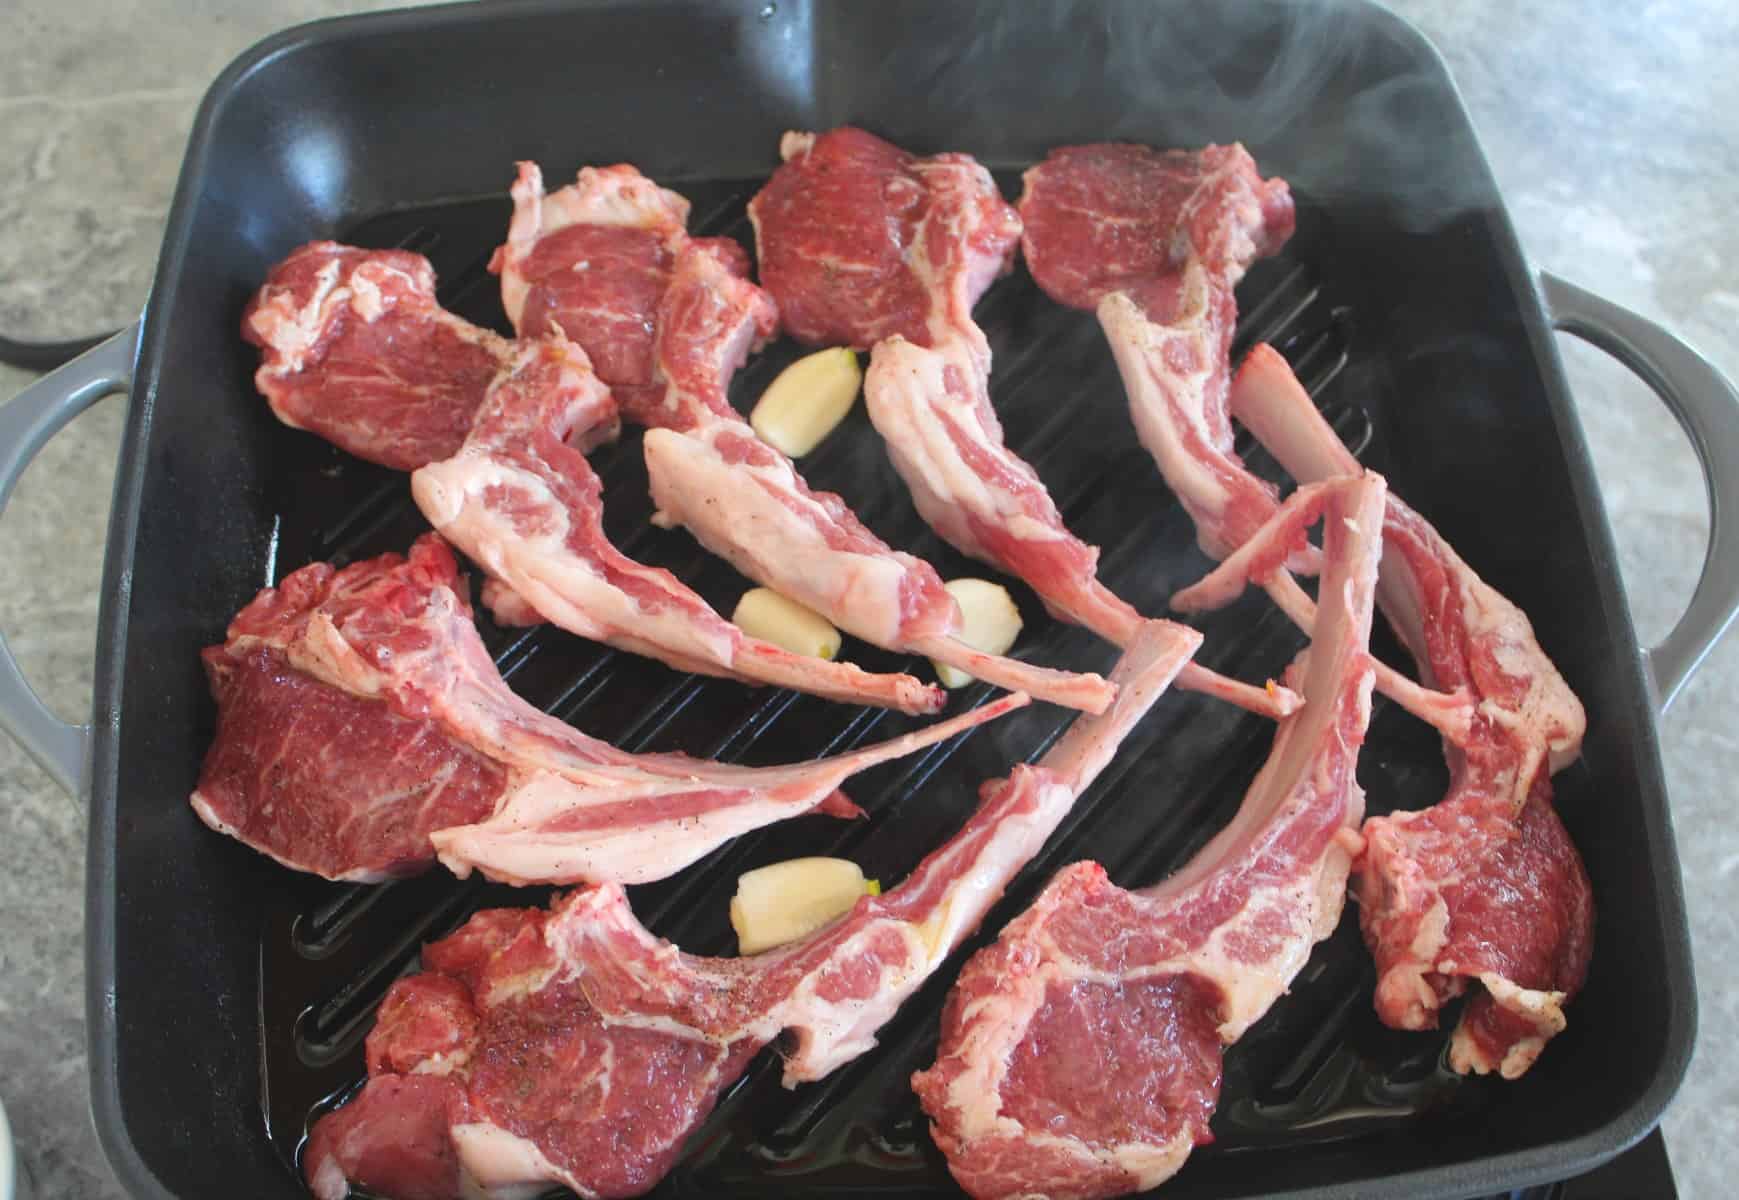 Lamb chops in the cast iron grill pan with garlic being seared on one side. The top side is not grilled yet. The picture even captures some smoke & steam coming out of the pan. 